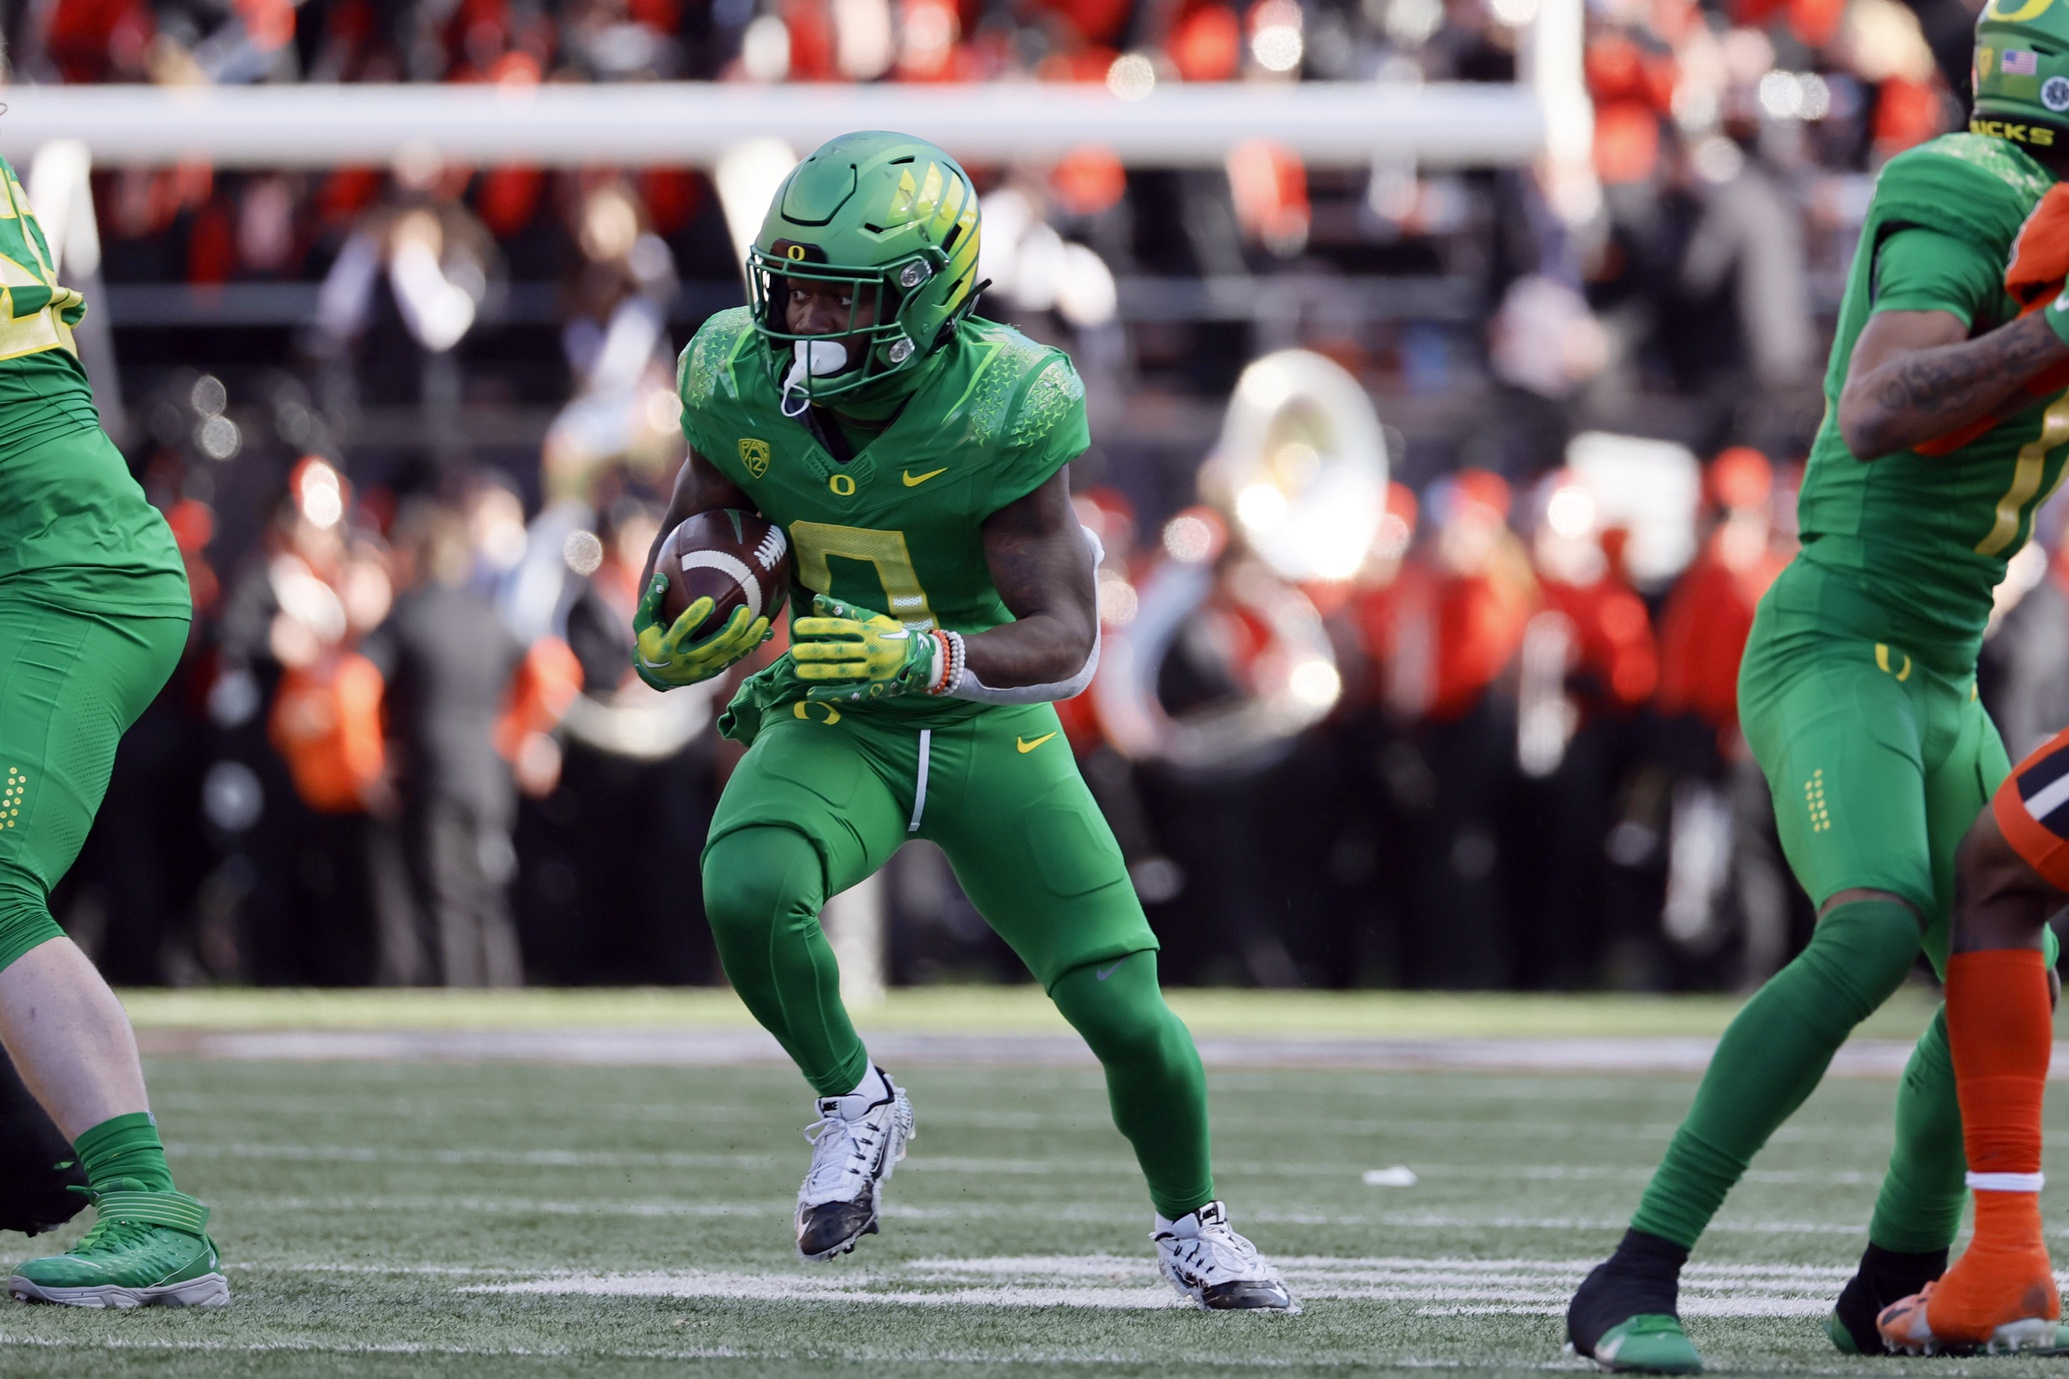 Oregon opens as double-digit favorite over Oregon State in Week 13 – Saturday Out West